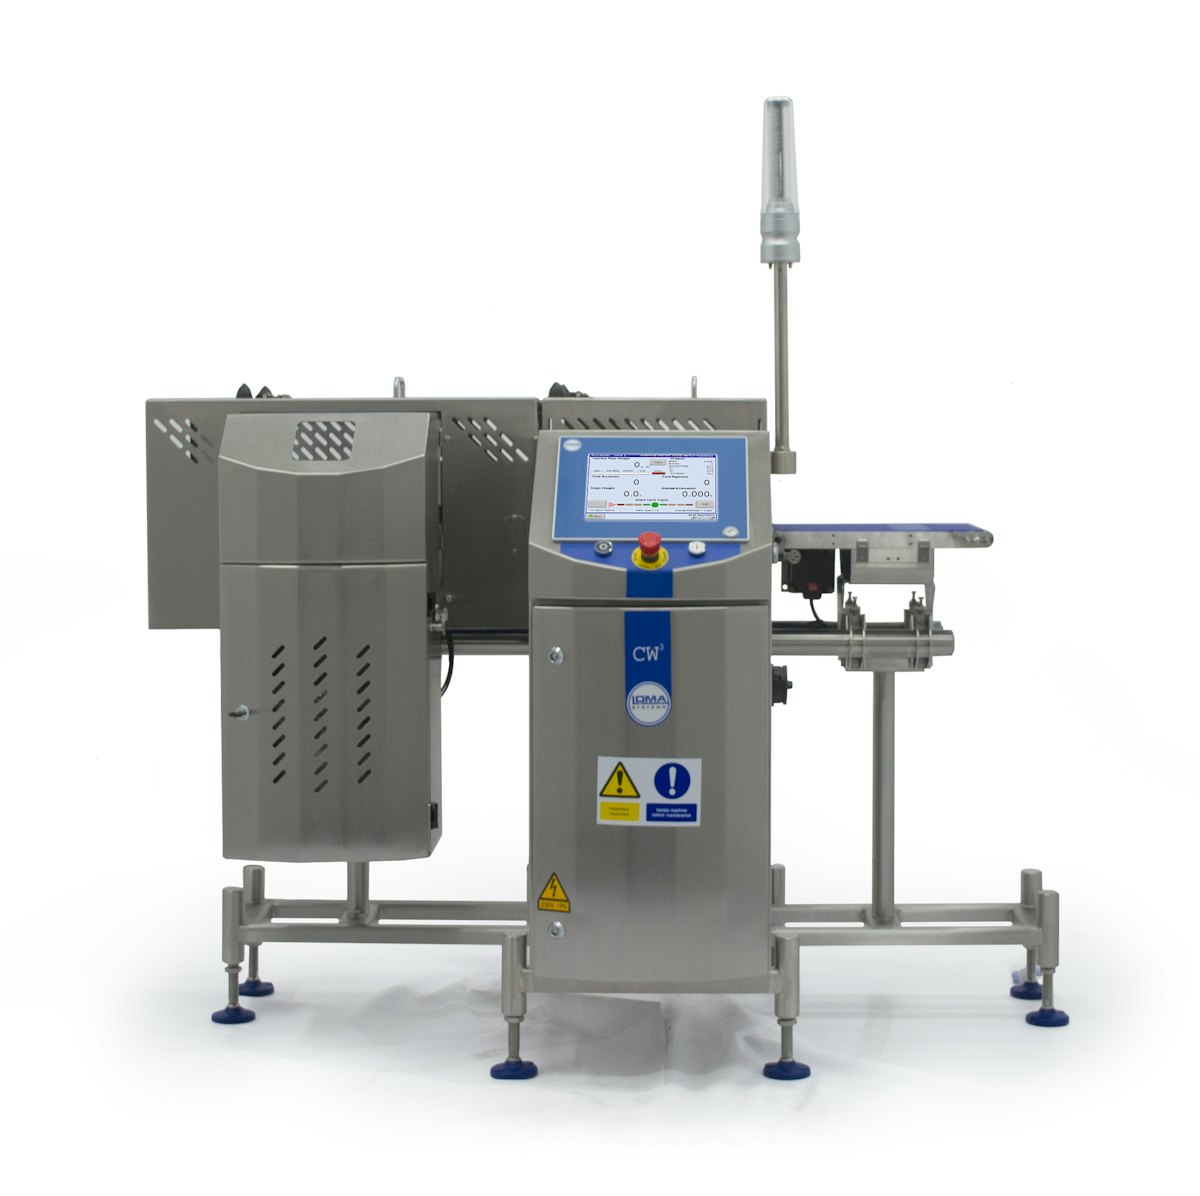 TurboFil to showcase module for syringe filling at Interphex NYC